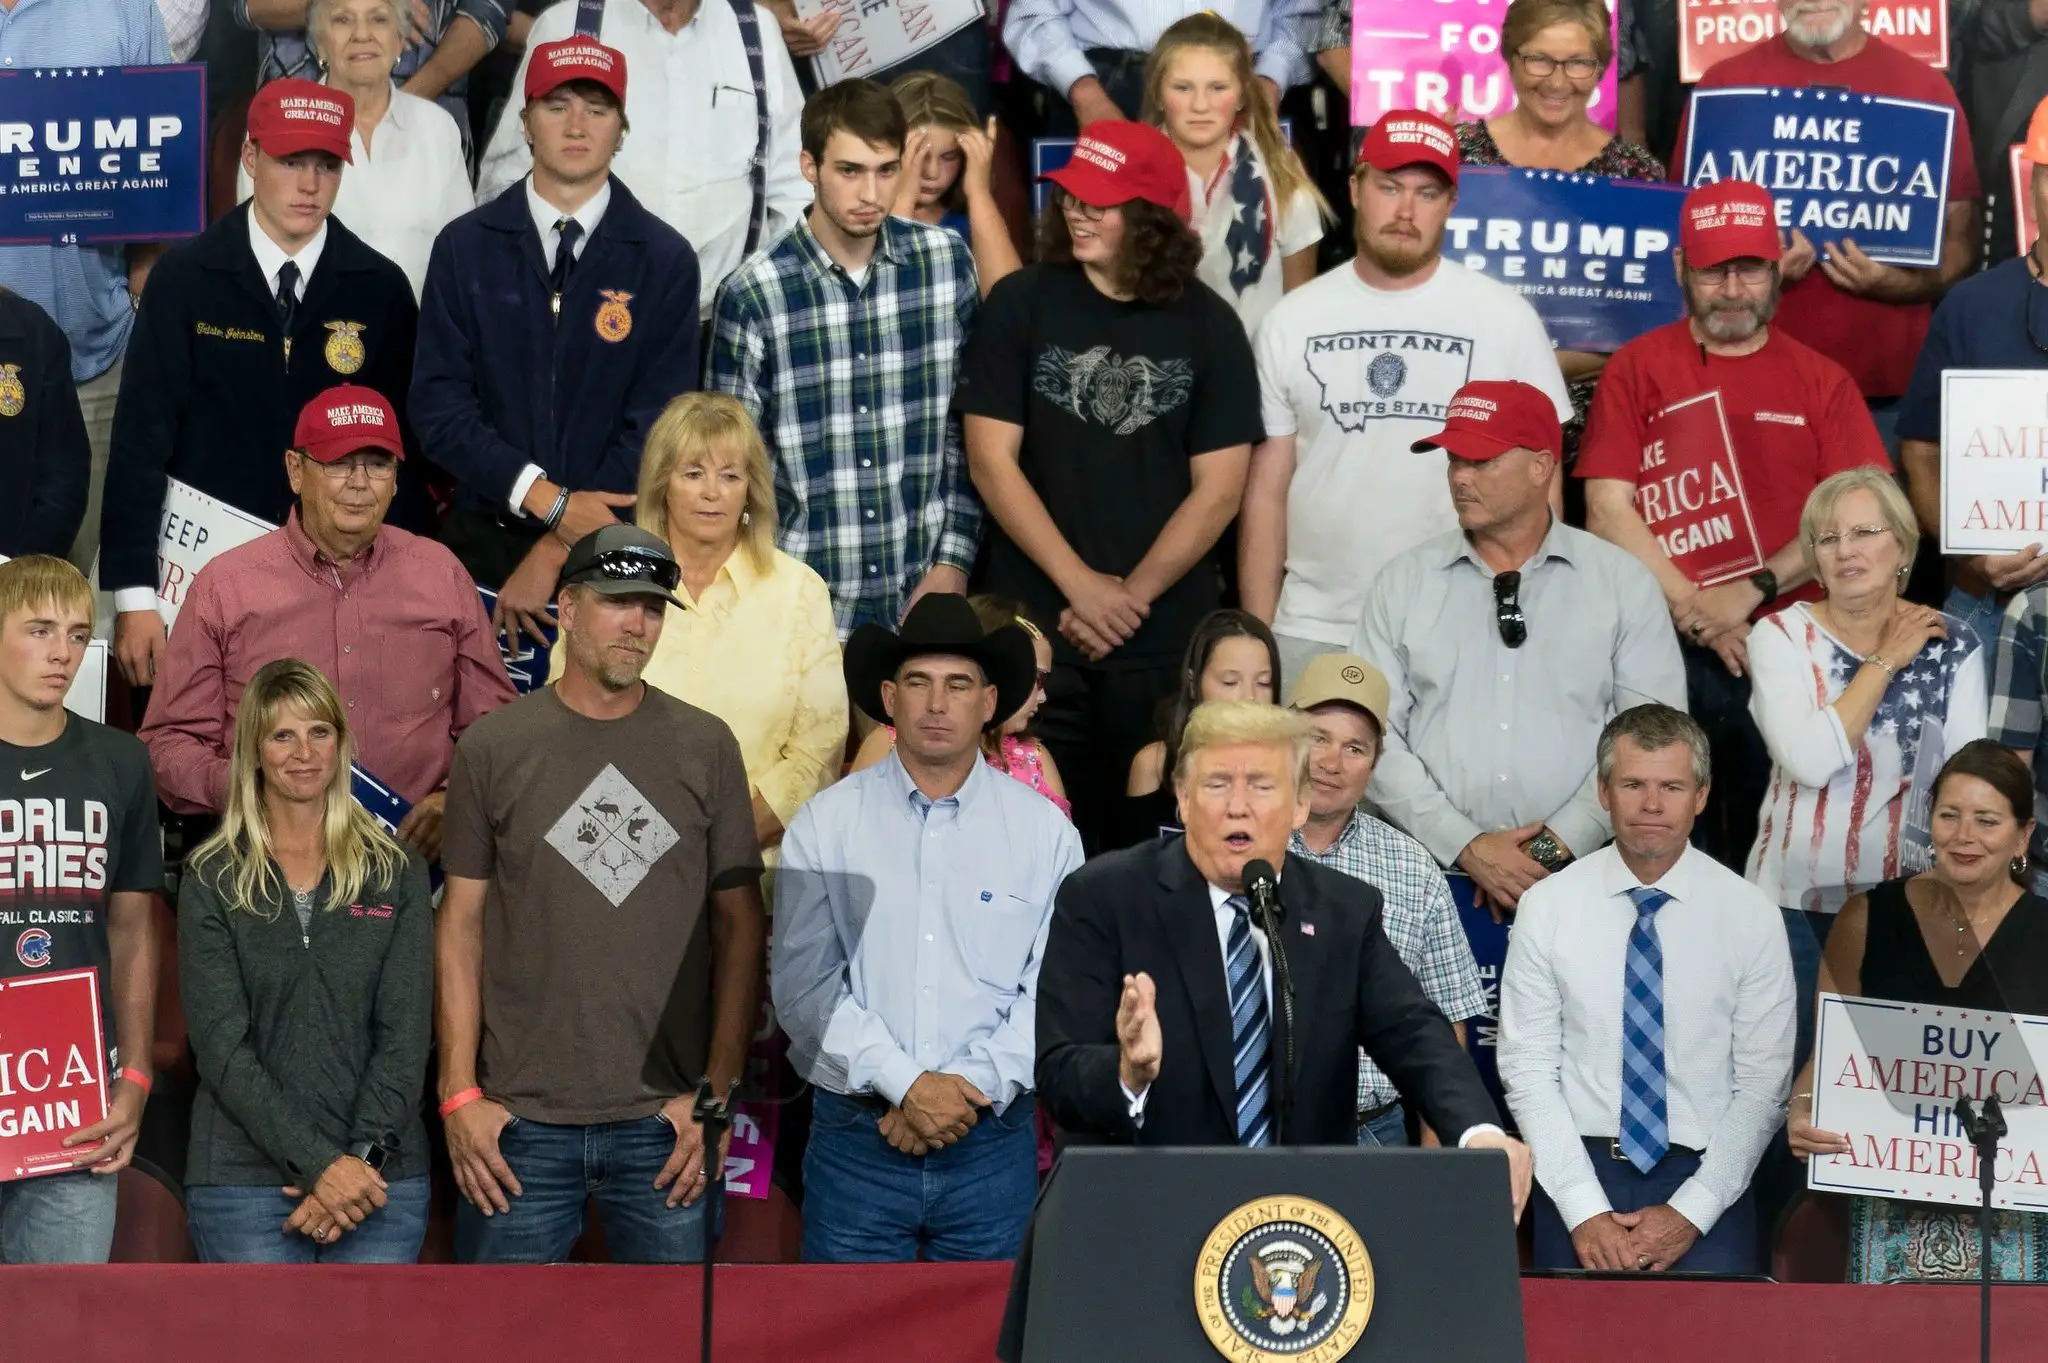 How Plaid Shirt Guy Got Prime Seating at a Trump Rally